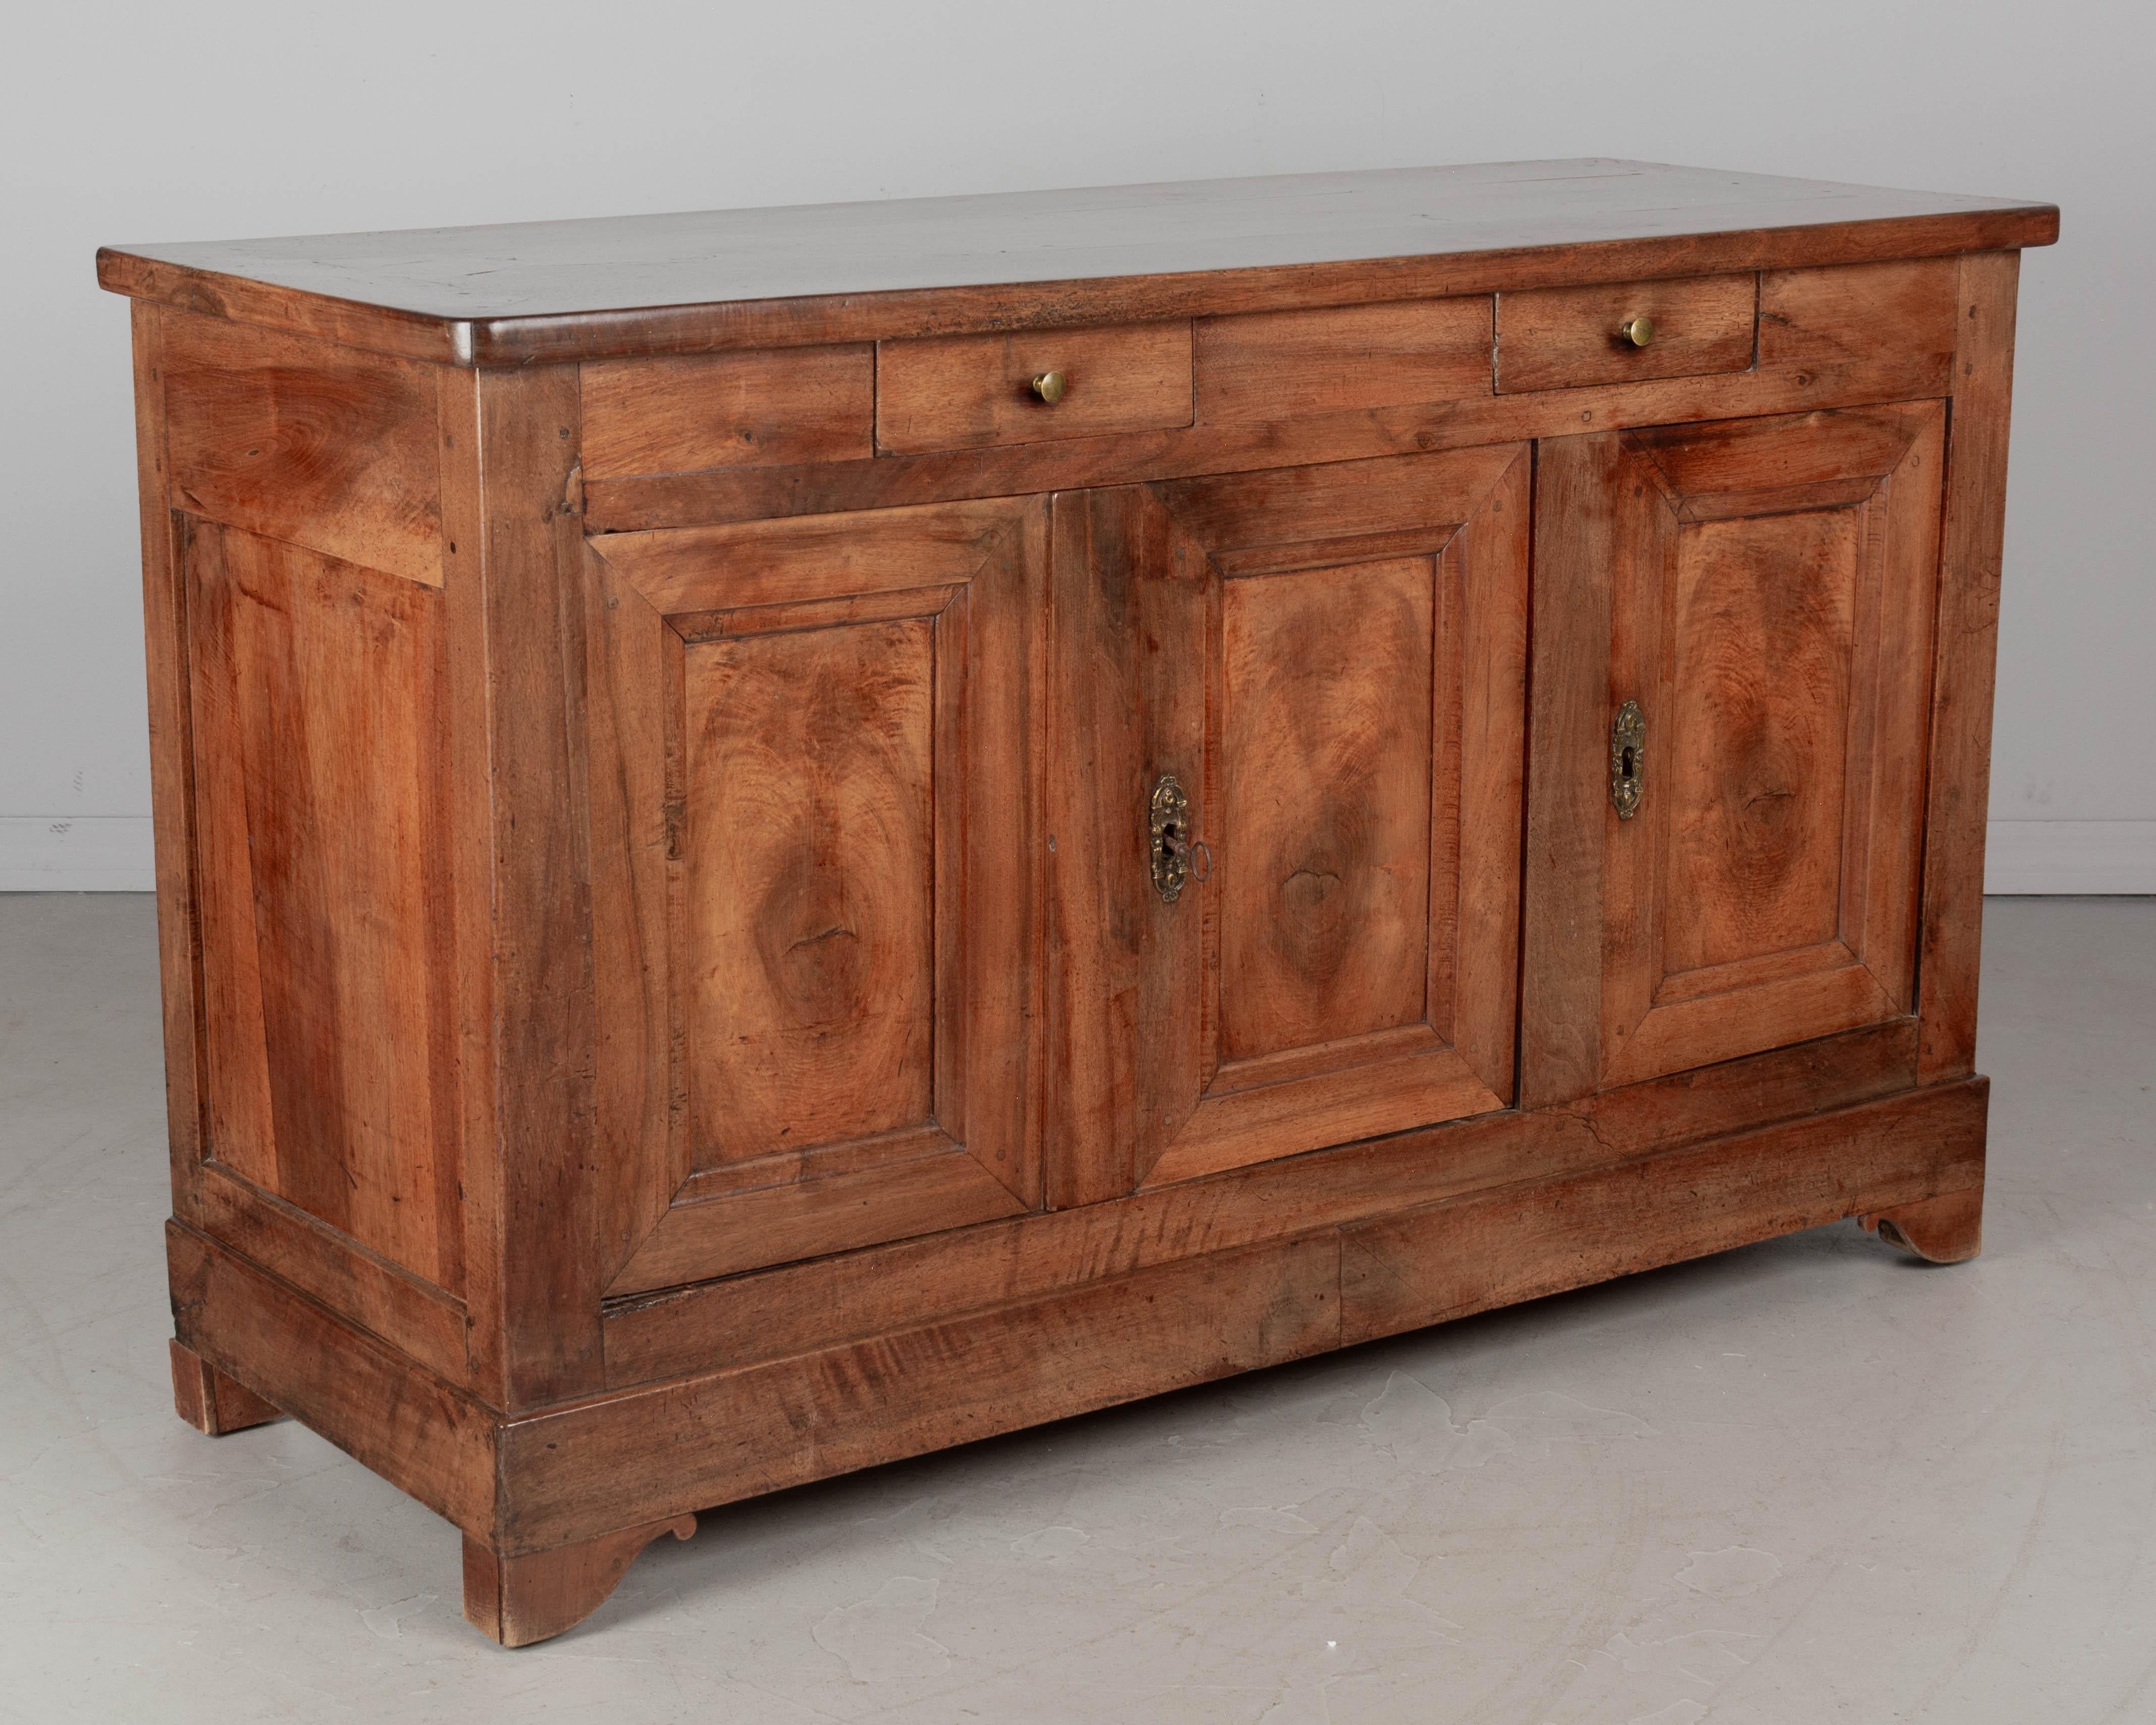 An early 19th Century French Louis Philippe enfilade, or sideboard made of solid walnut. Three paneled doors made from thick planks of walnut, each framing a large knot in the wood grain. Two dovetailed drawers for silverware. Original cast brass